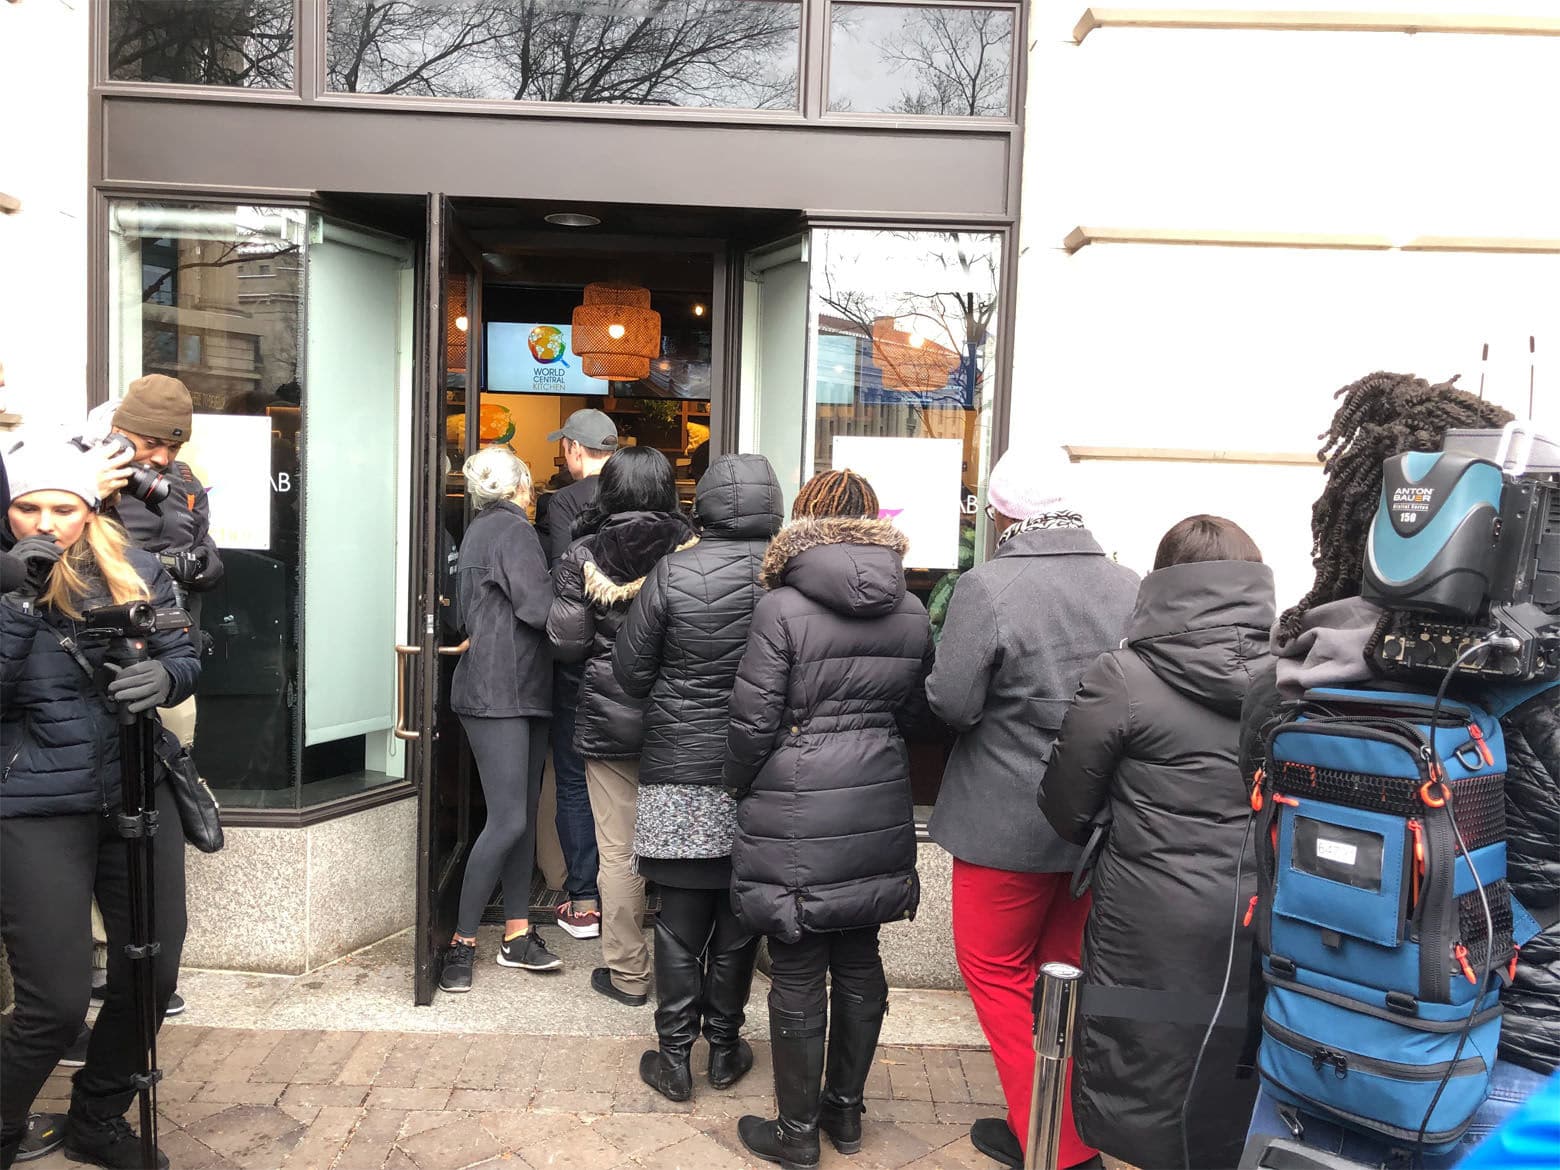 Federal employees and contractors who aren't getting paid because of the shutdown are lining up for free, hot, gourmet meals from the charity founded by Chef Andres. (WTOP/Kristi King)